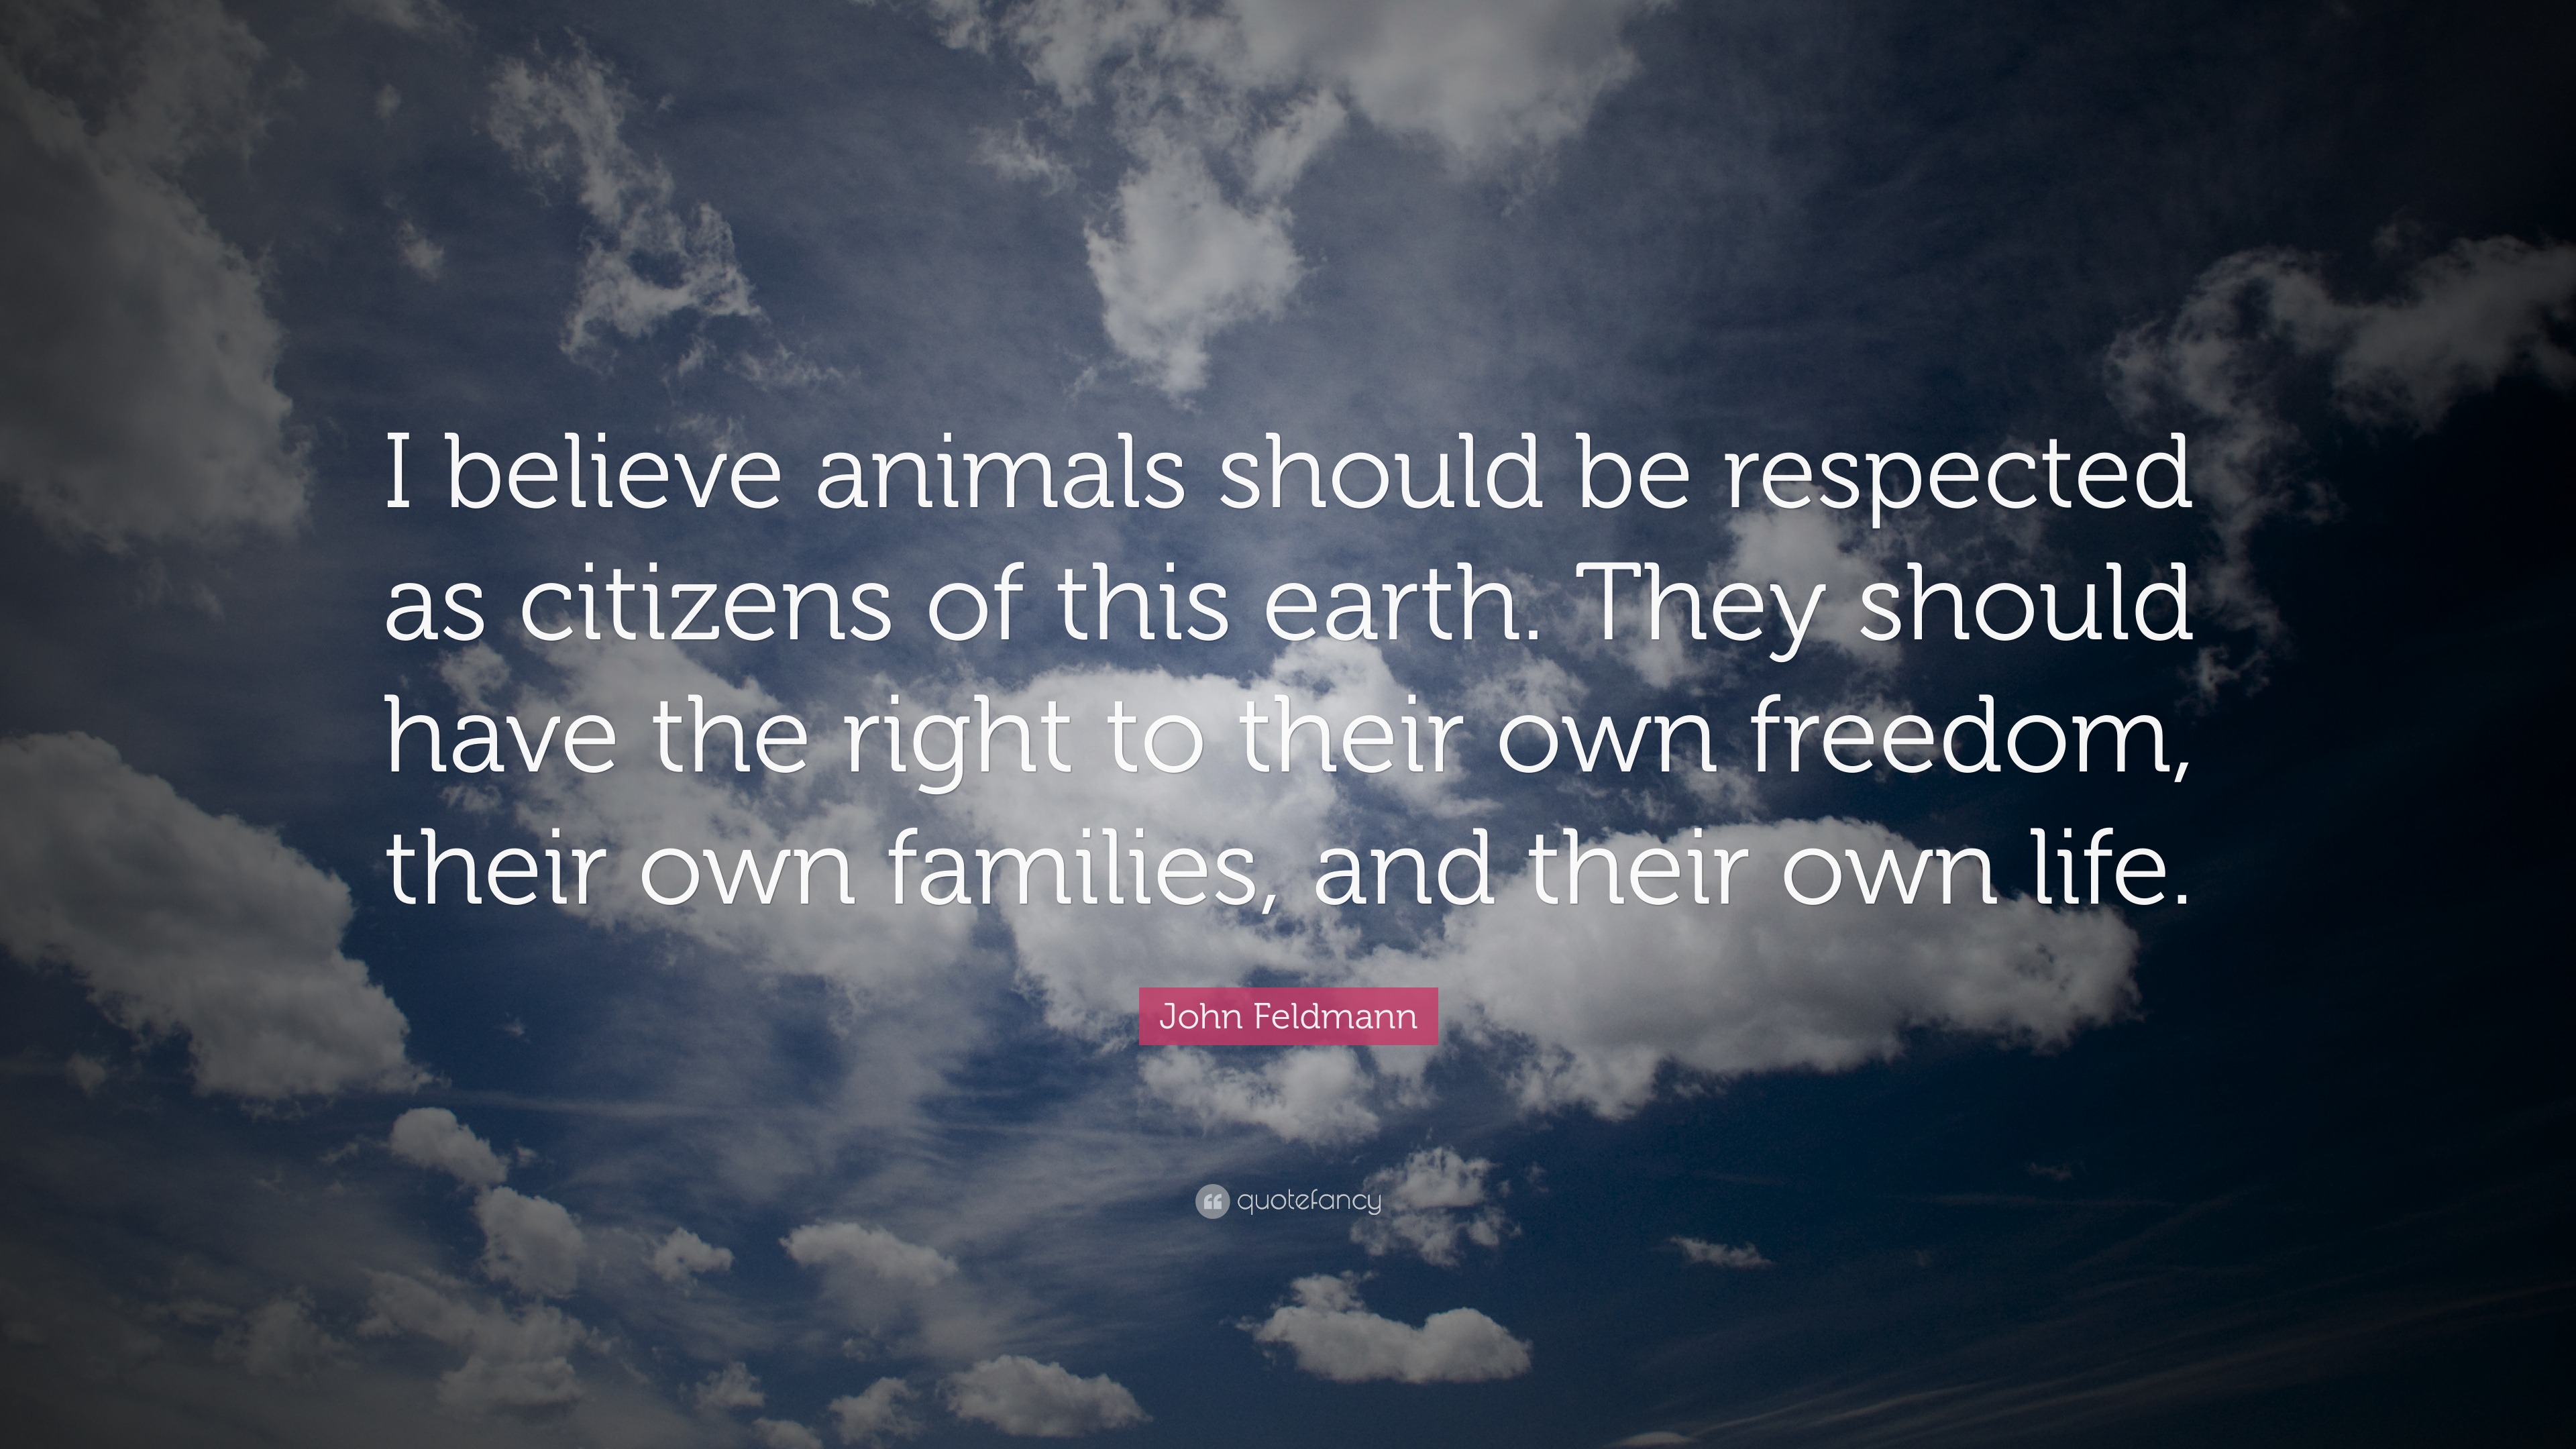 John Feldmann Quote: “I believe animals should be respected as citizens of  this earth. They should have the right to their own freedom, their ...”